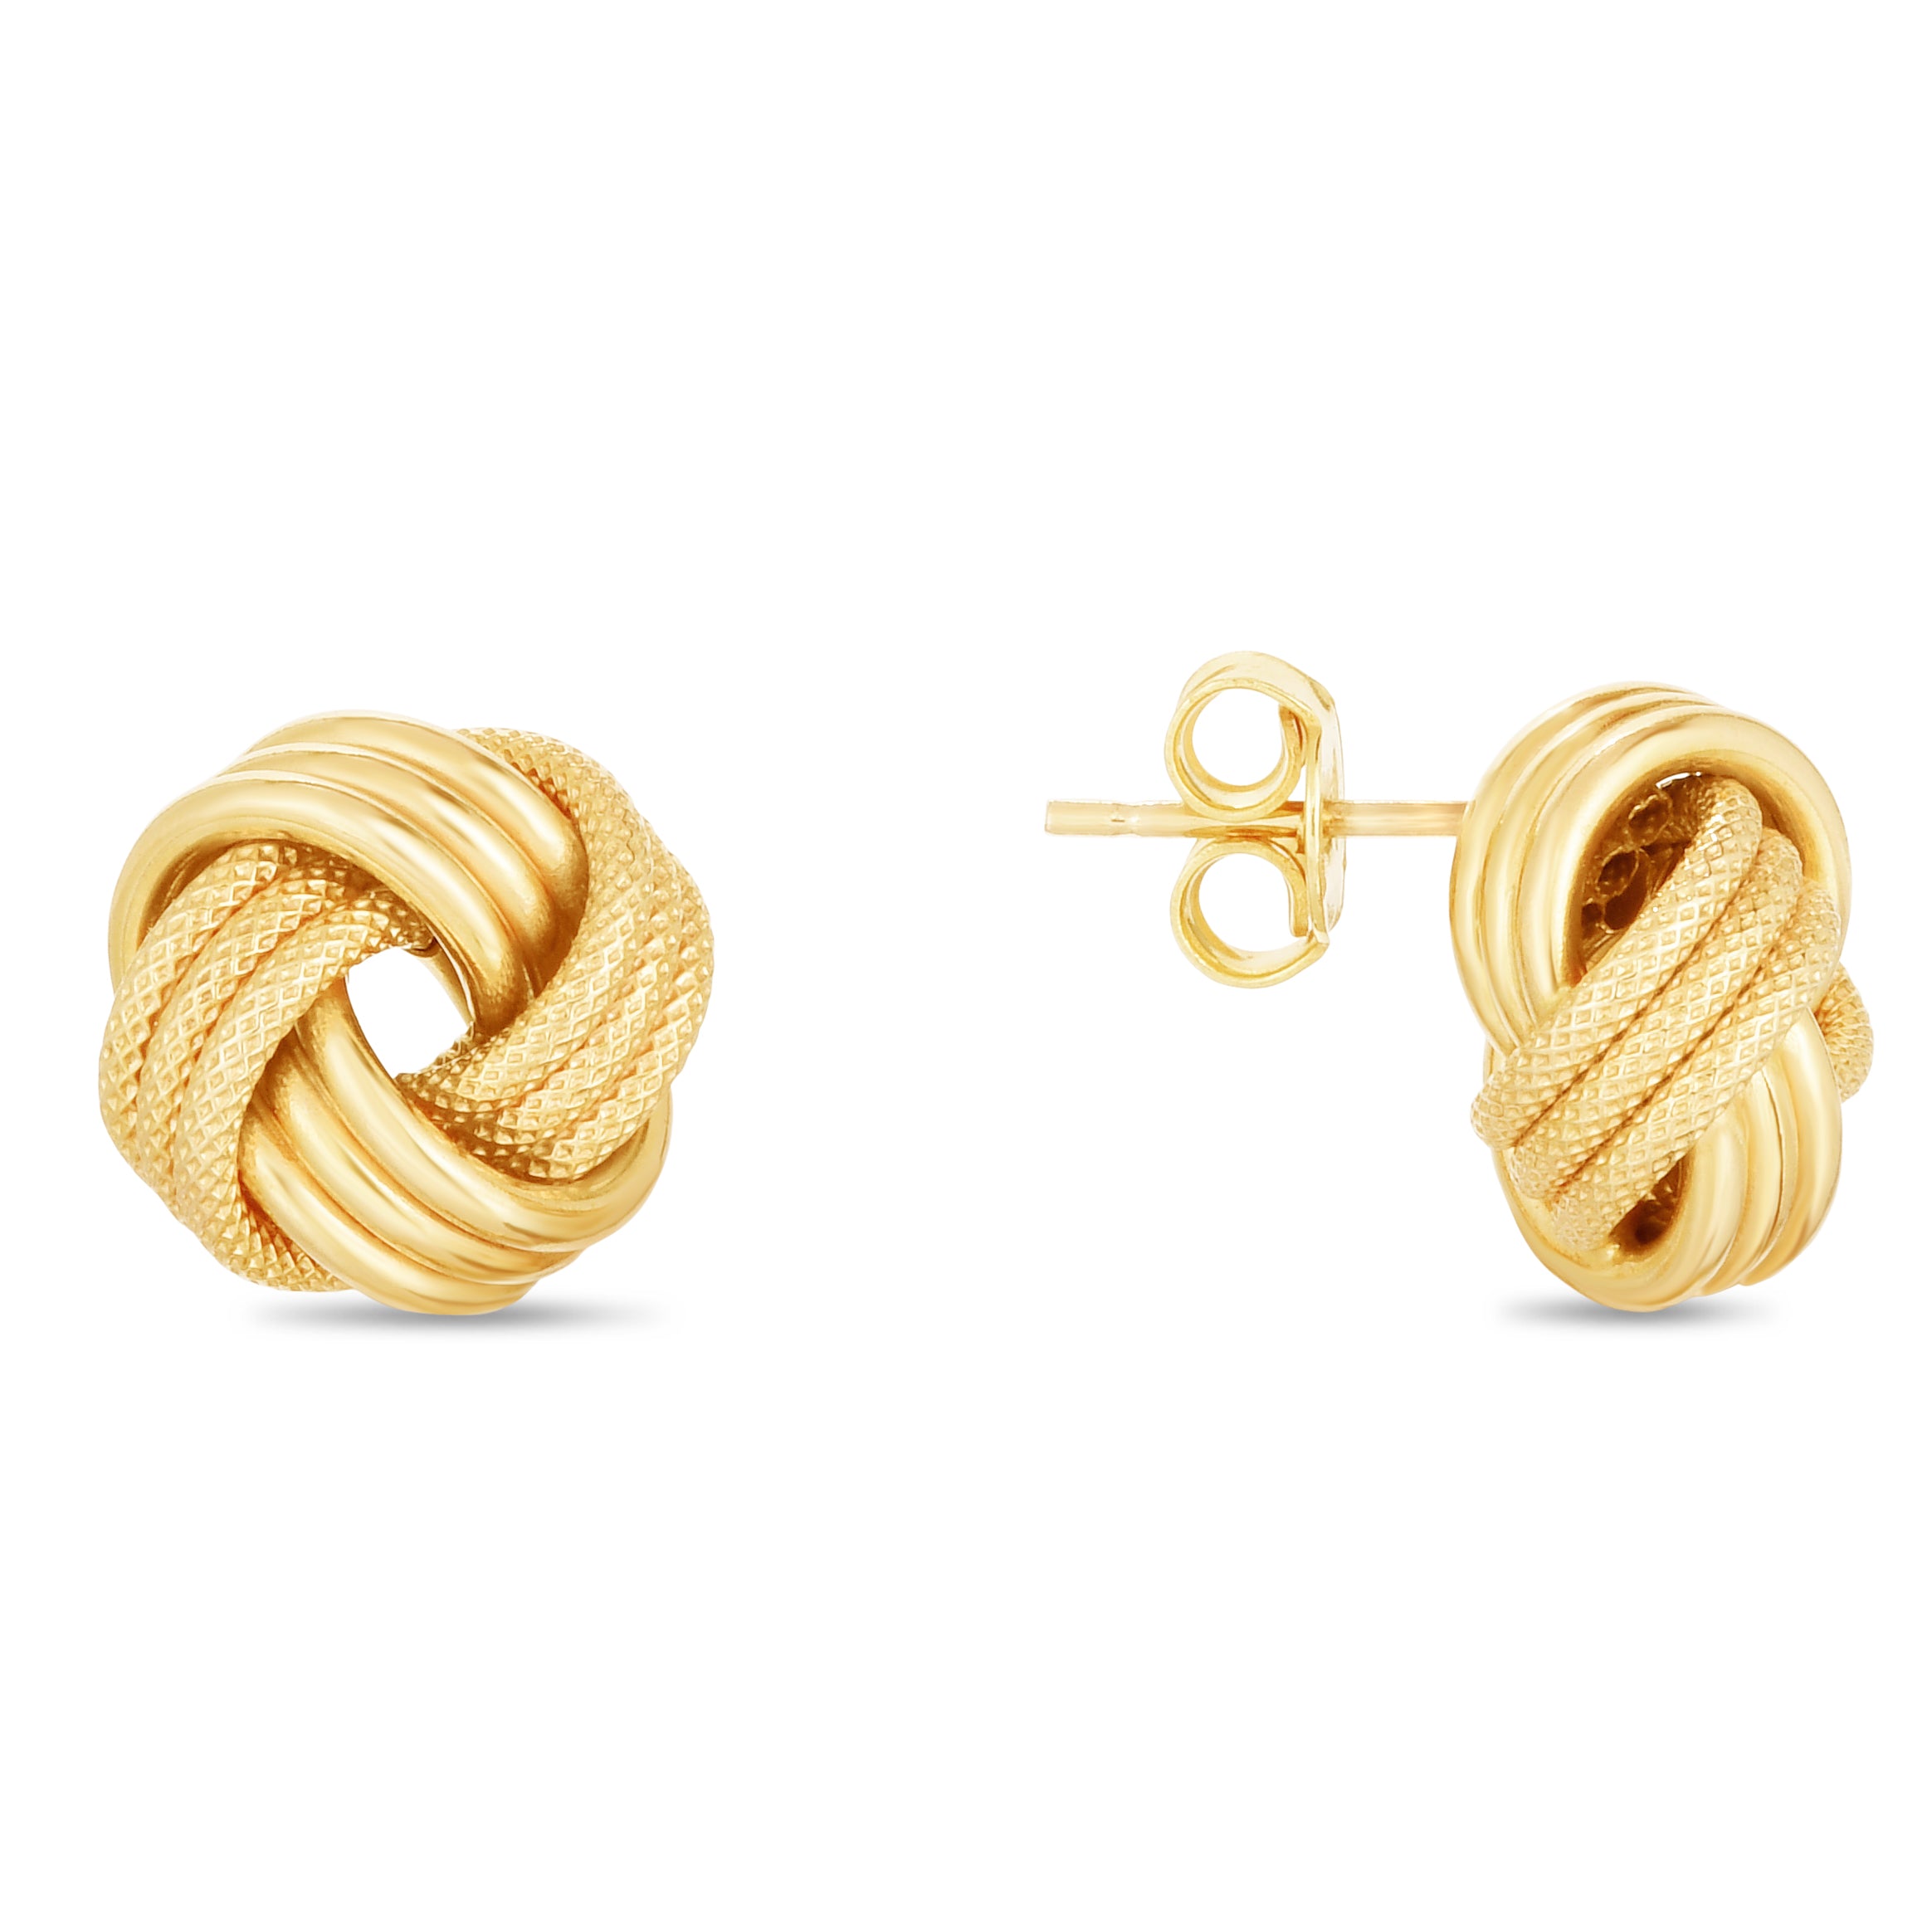 Real 14kt Yellow Gold Polished Love Knot Post Earrings